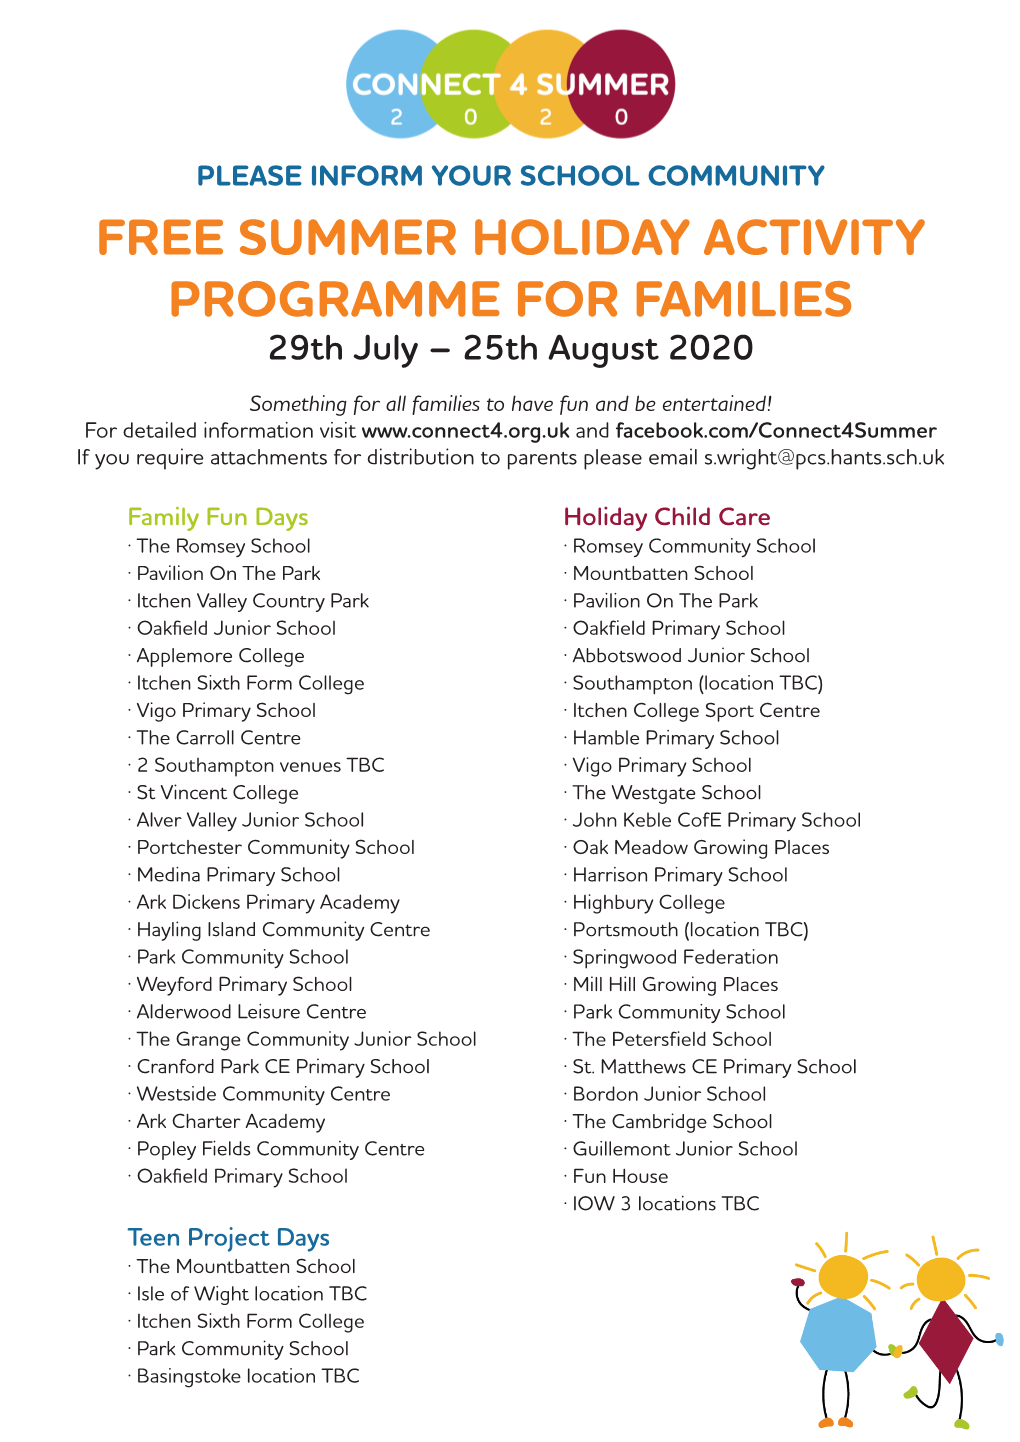 FREE SUMMER HOLIDAY ACTIVITY PROGRAMME for FAMILIES 29Th July – 25Th August 2020